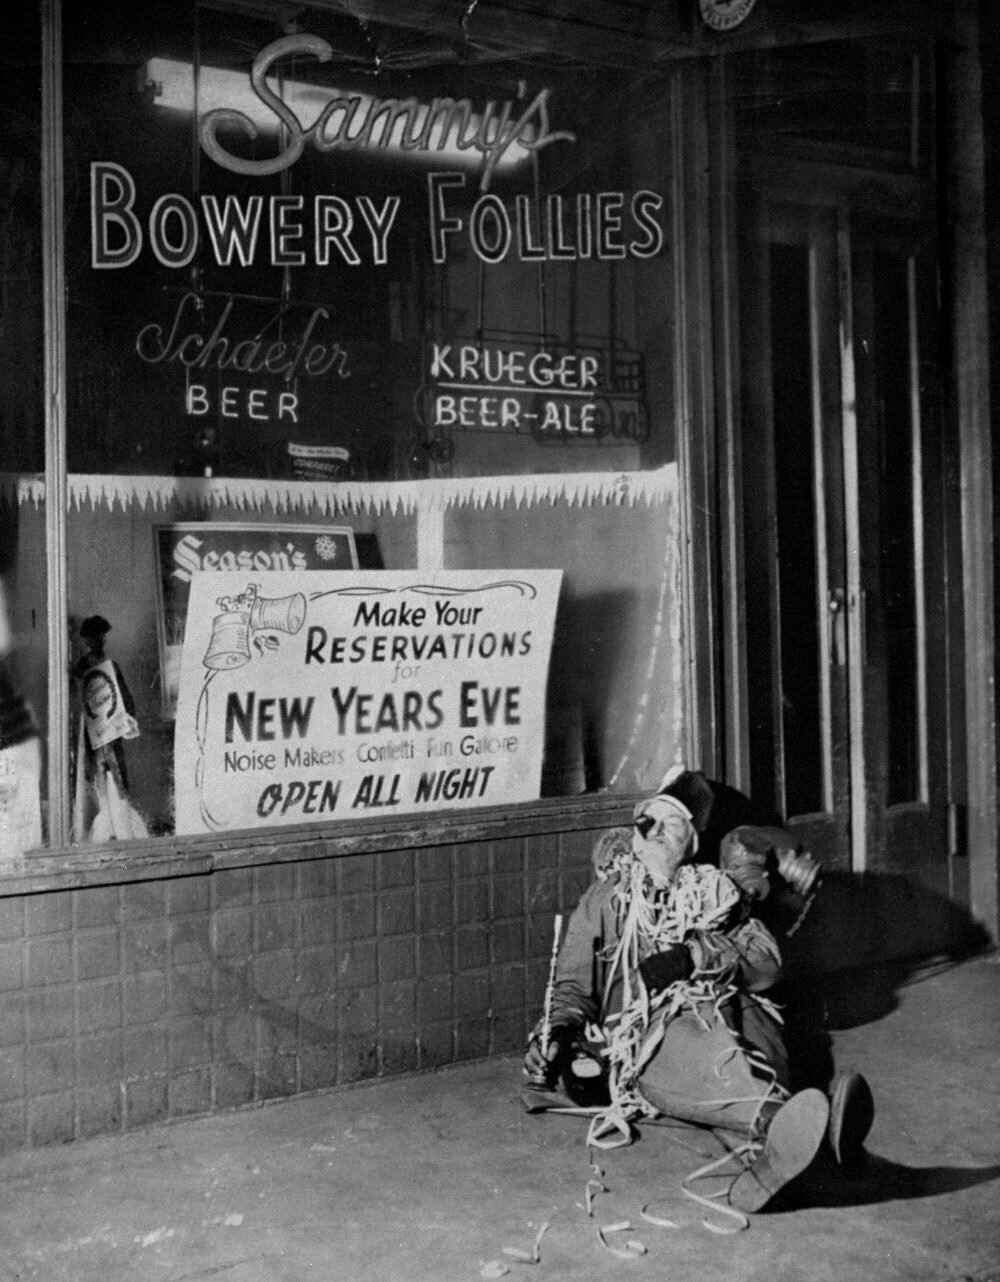 A Gentleman Sits Outside The Bowery After He Wasn’t Able To Get A Seat To Celebrate New Year’s Eve At Sammy’s Bowery Follies In New York.